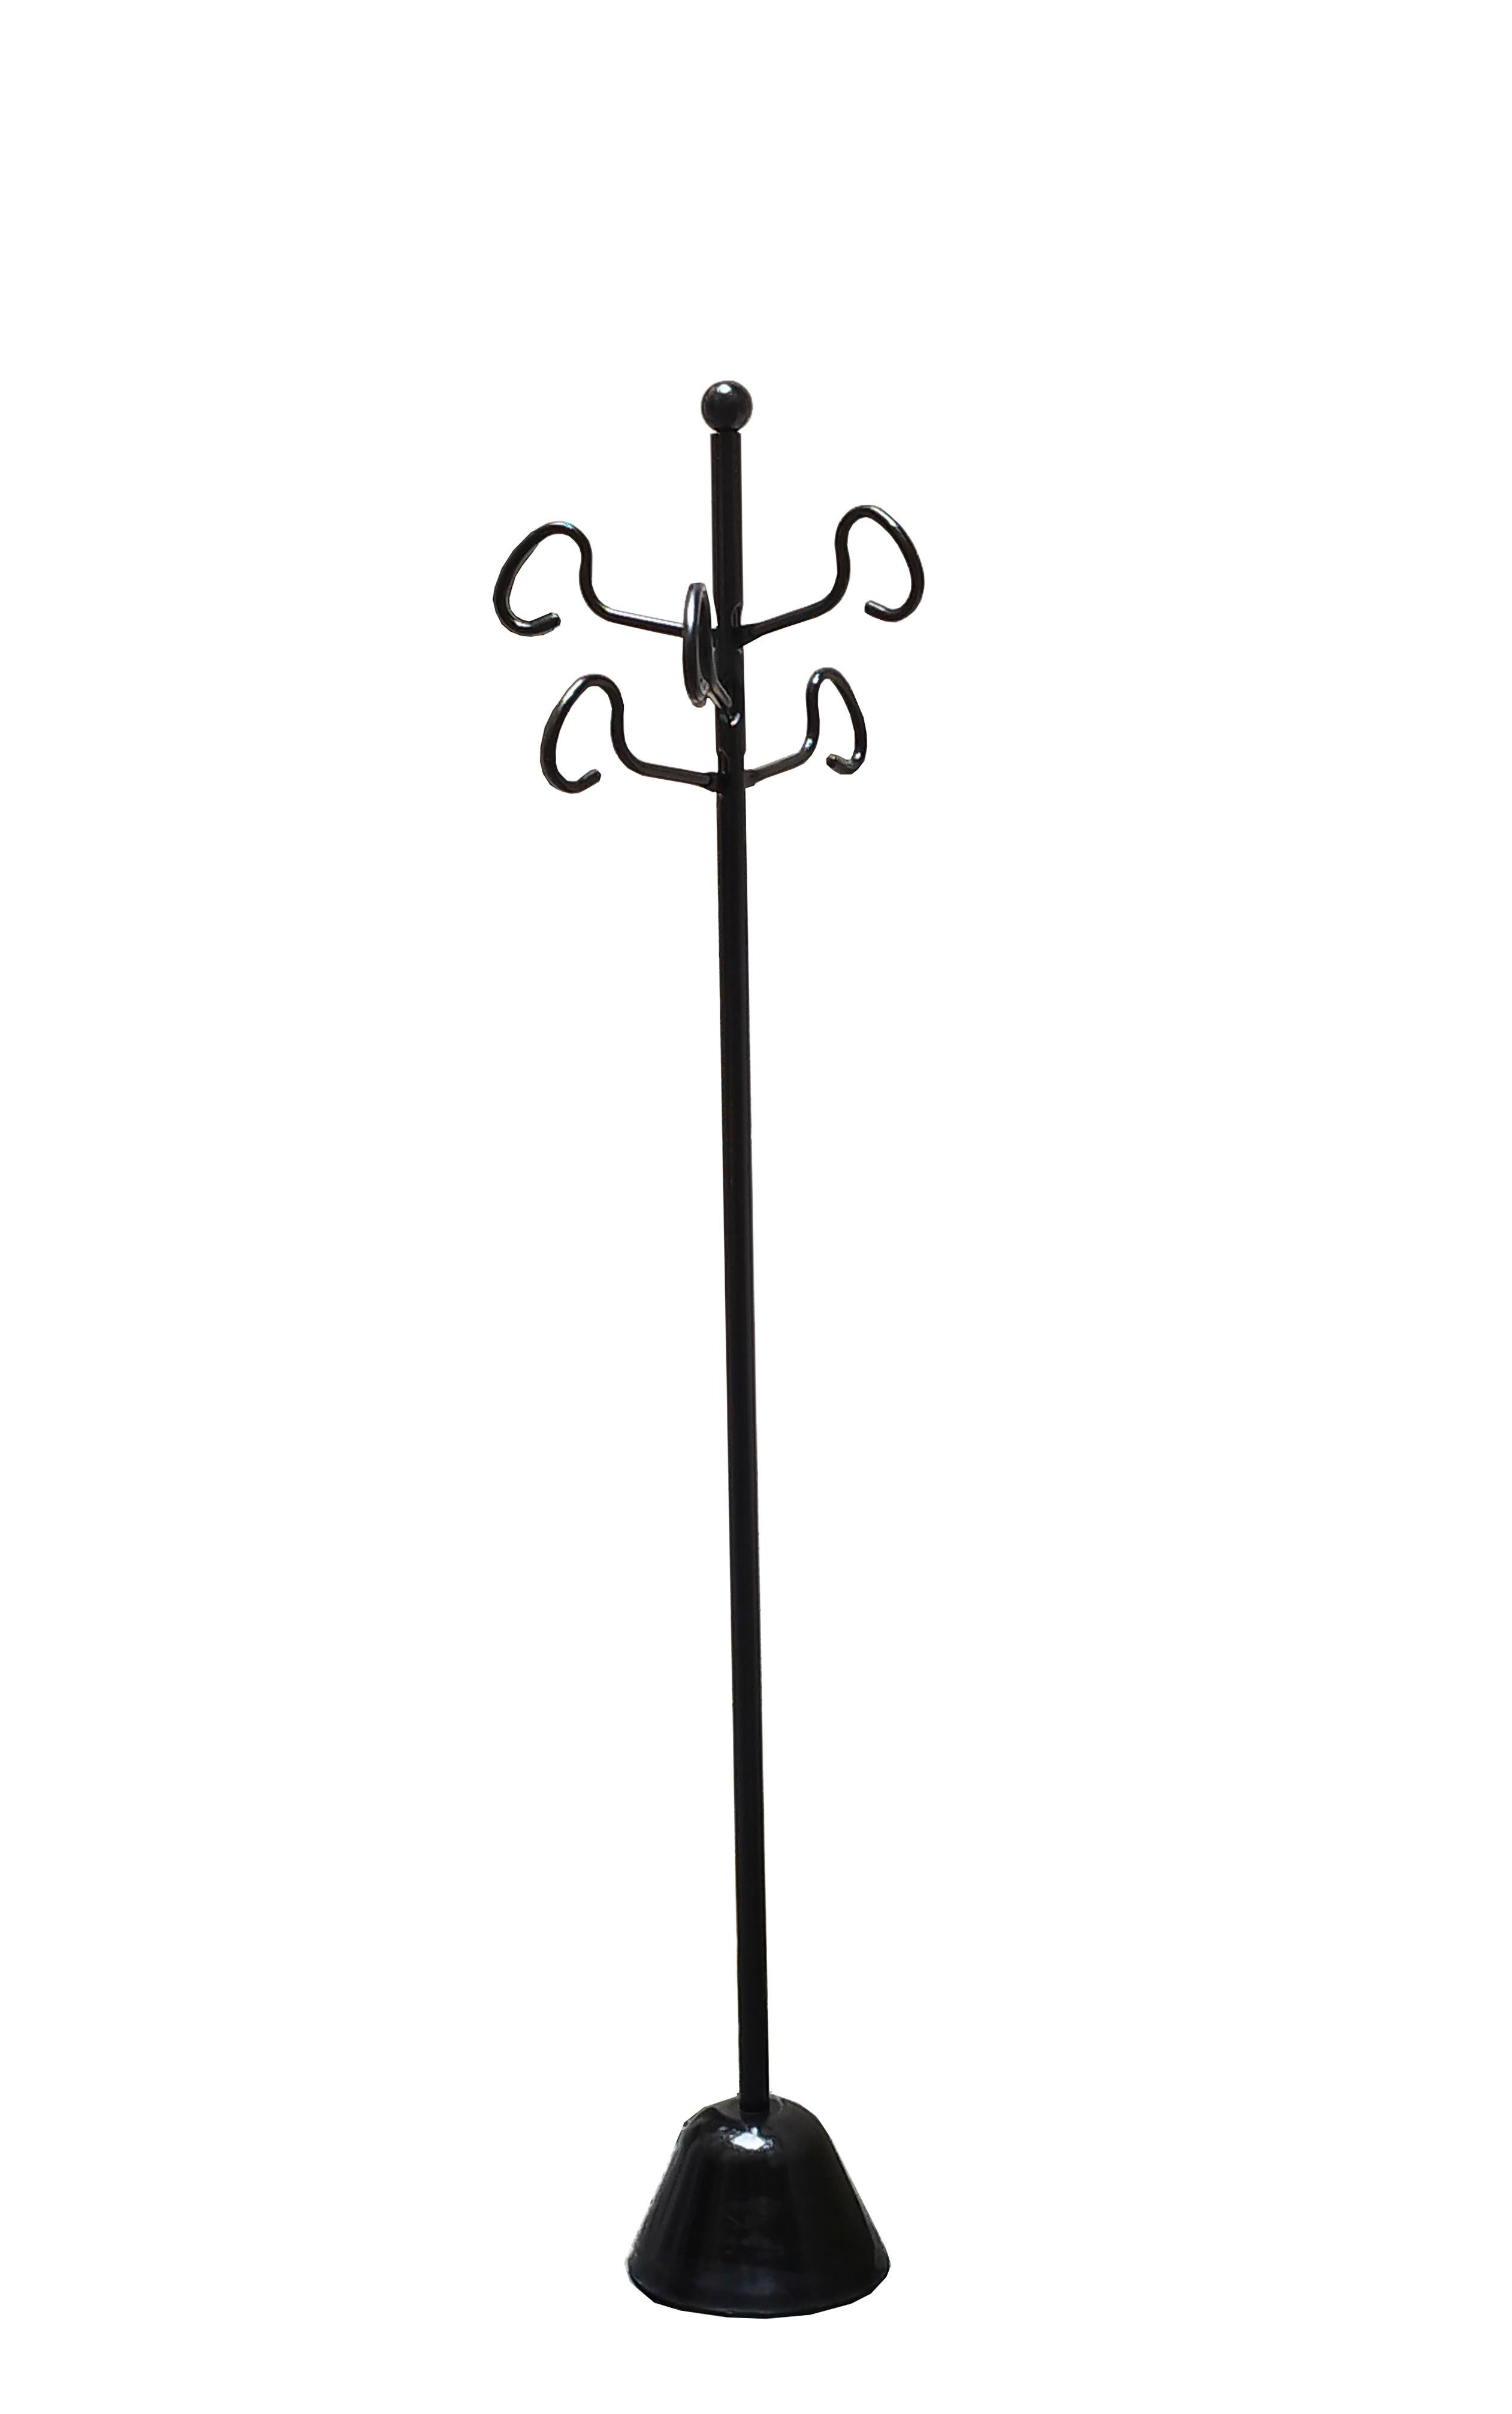 Coat stand from the Servi series by Achille & Pier Giacomo Castiglioni, 1985. Base in black painted polypropylene. Support rod and coat-hook arms in painted steel.